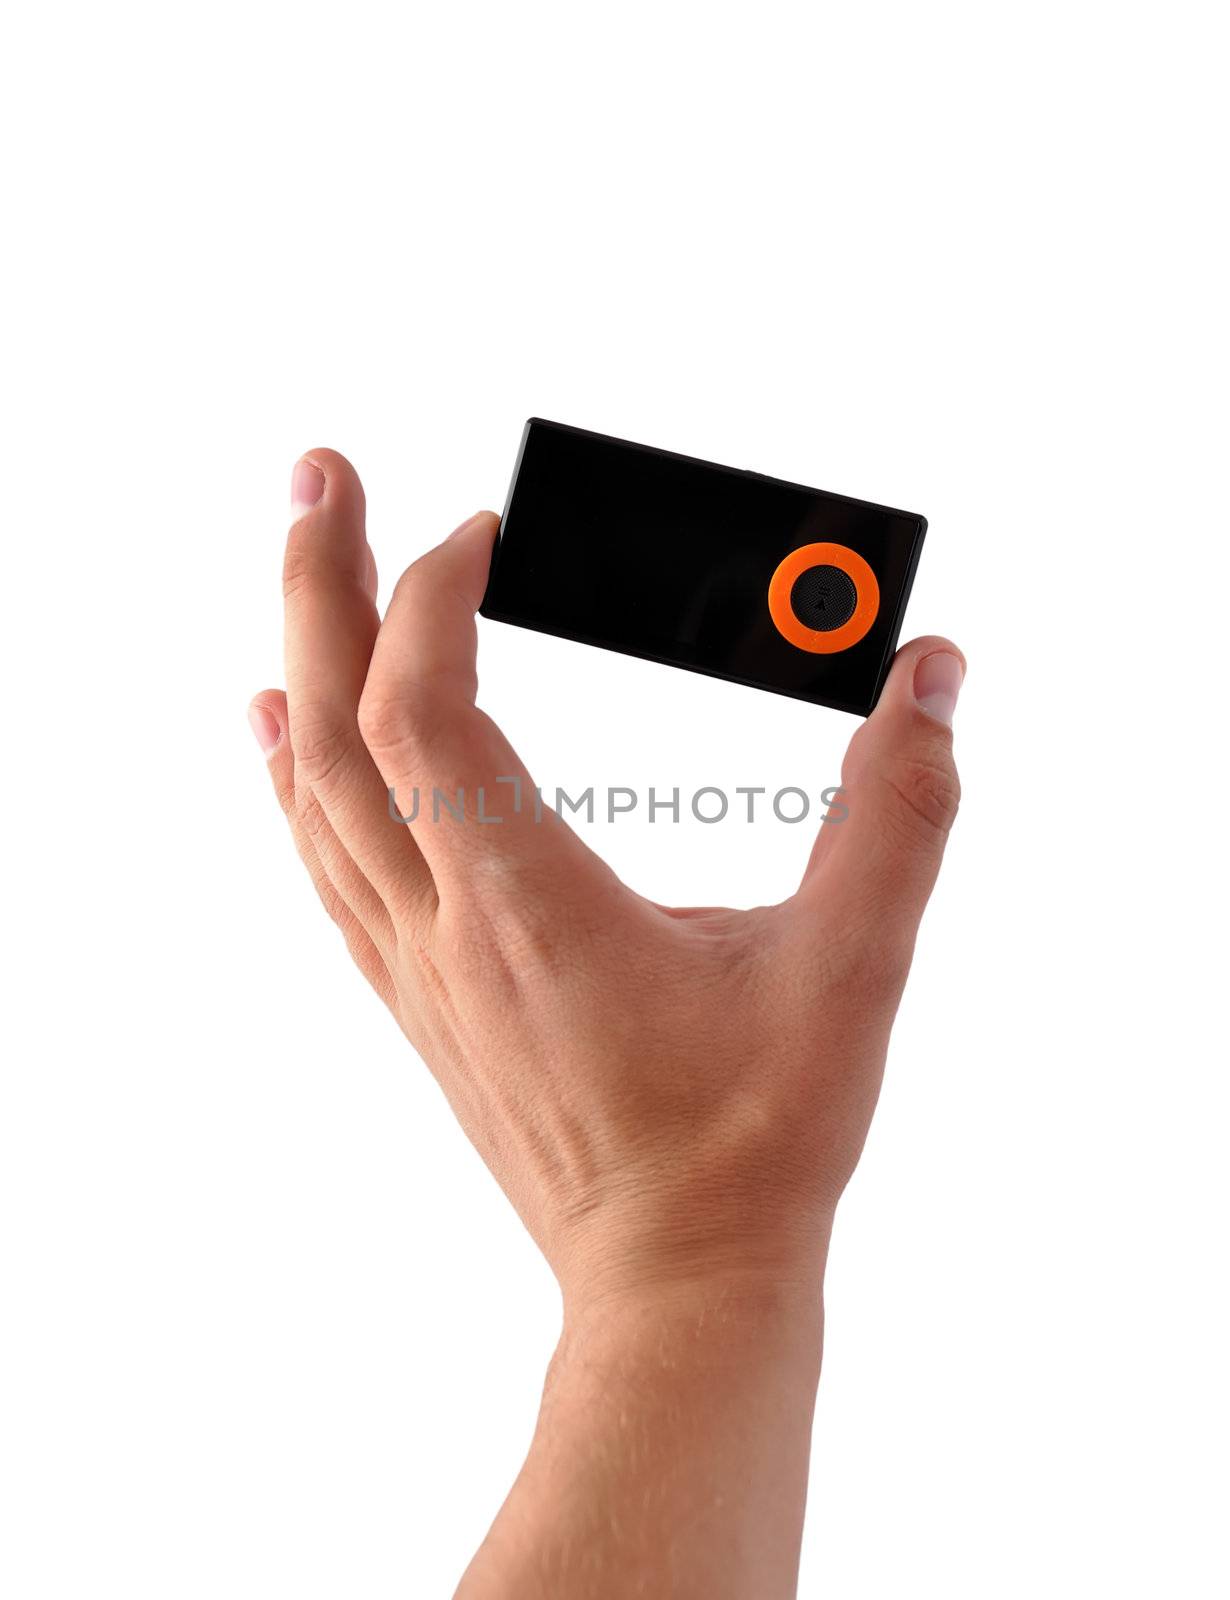 mp3 player black on a white background